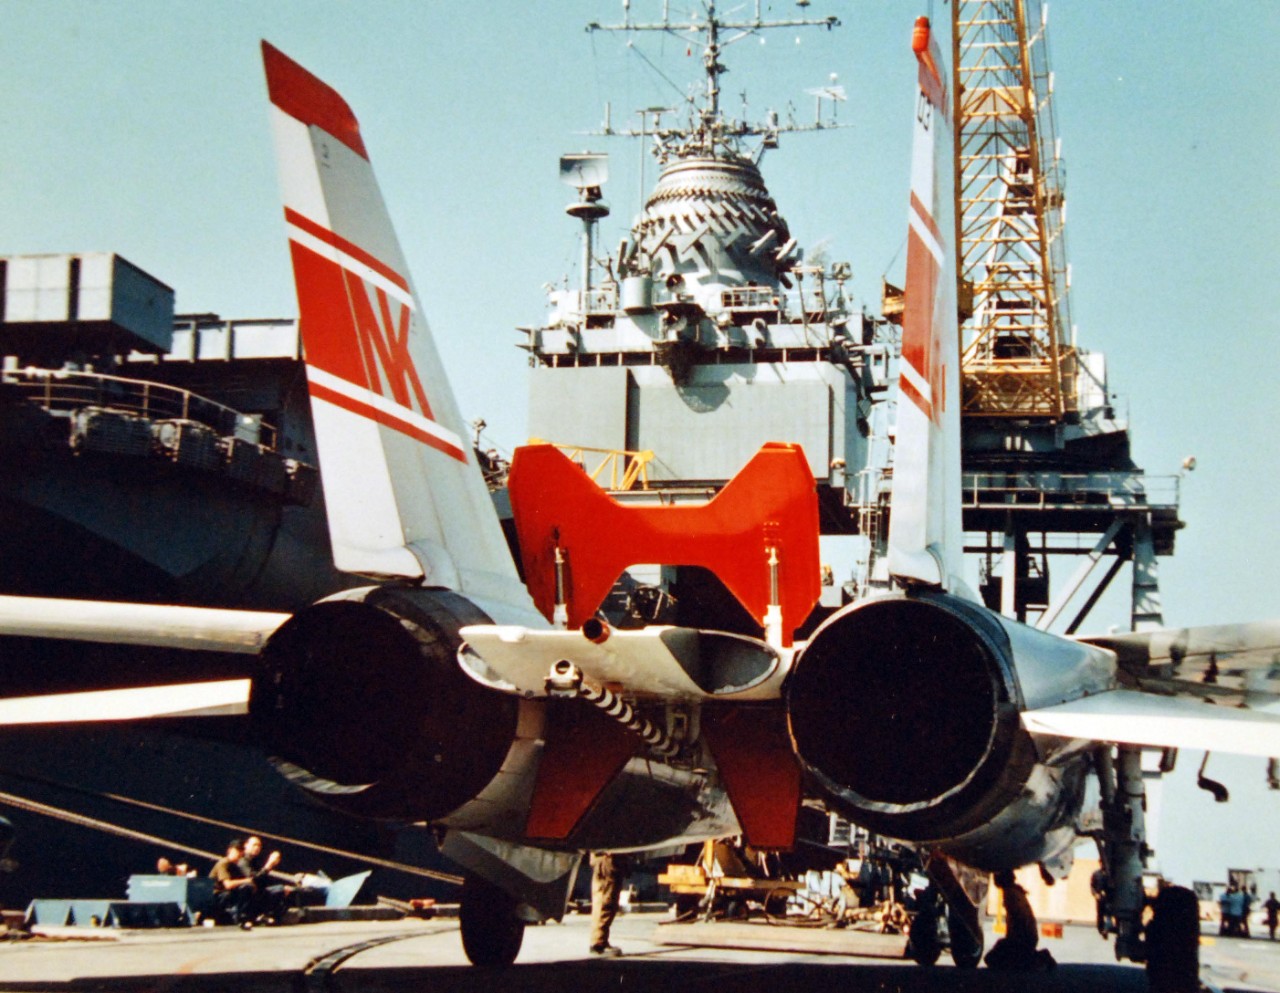 428-GX-K-105897:  USS Enterprise (CVAN-65), 1974.  View from behind a Fighter-Squadron One, VF-1, F-14A “Tomcat” fighter aircraft on a pier for loading onboard the carrier at Naval Air Station, Alameda, California.  Photographed by PH2 Paul Burns, September 14, 1974   Official U.S. Navy Photograph, now in the collections of the National Archives.  (2017/11/29).  